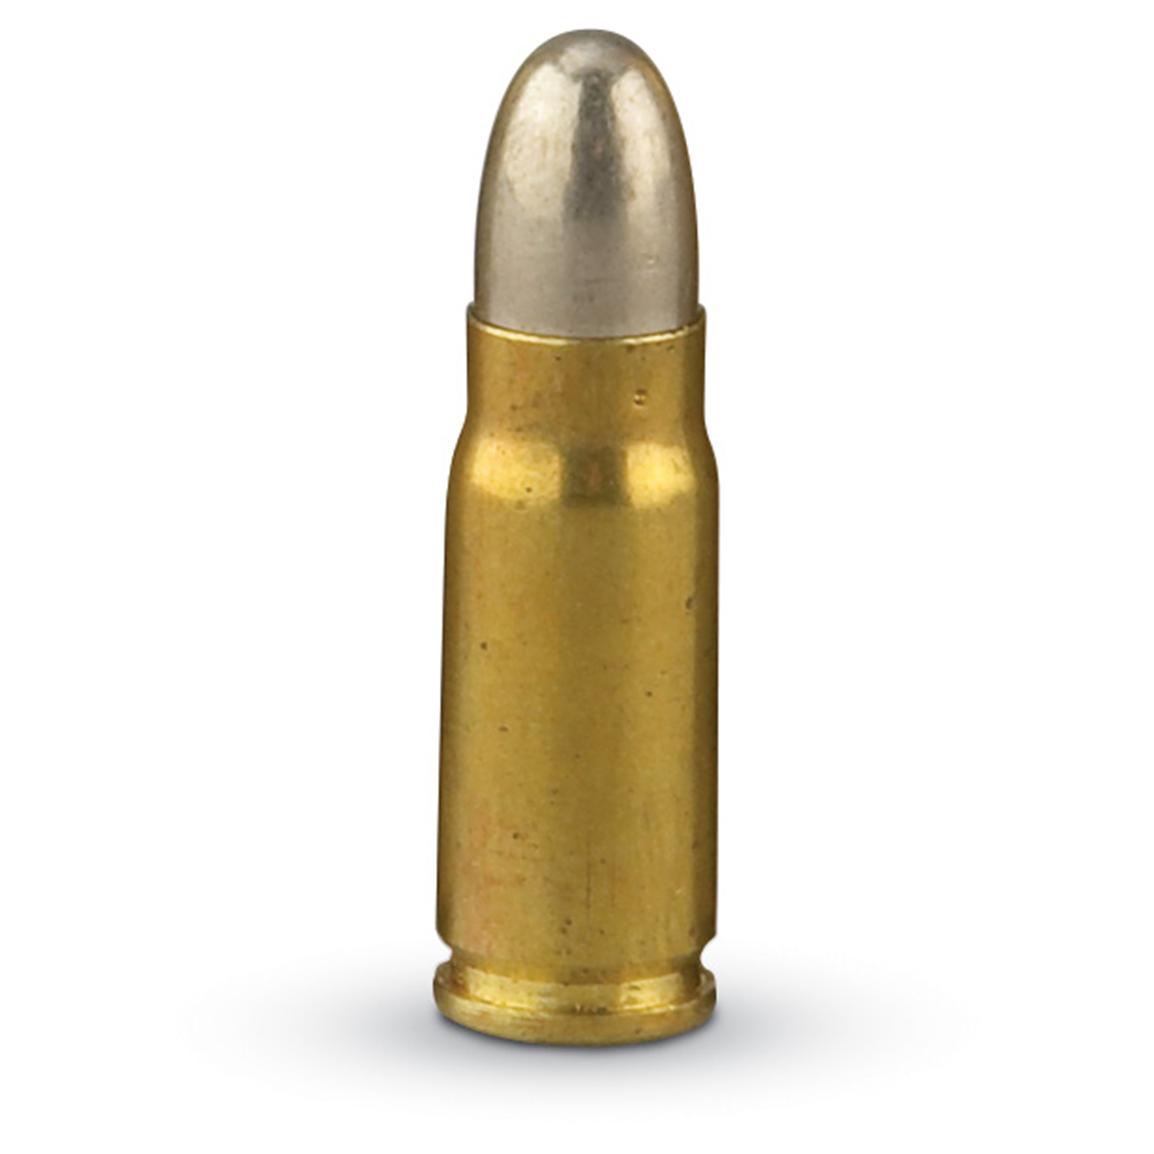 20 Rds 7 63 Mm Mauser 85 Gr Fmj Ammo 118240 At Sportsman S Guide | Free ...